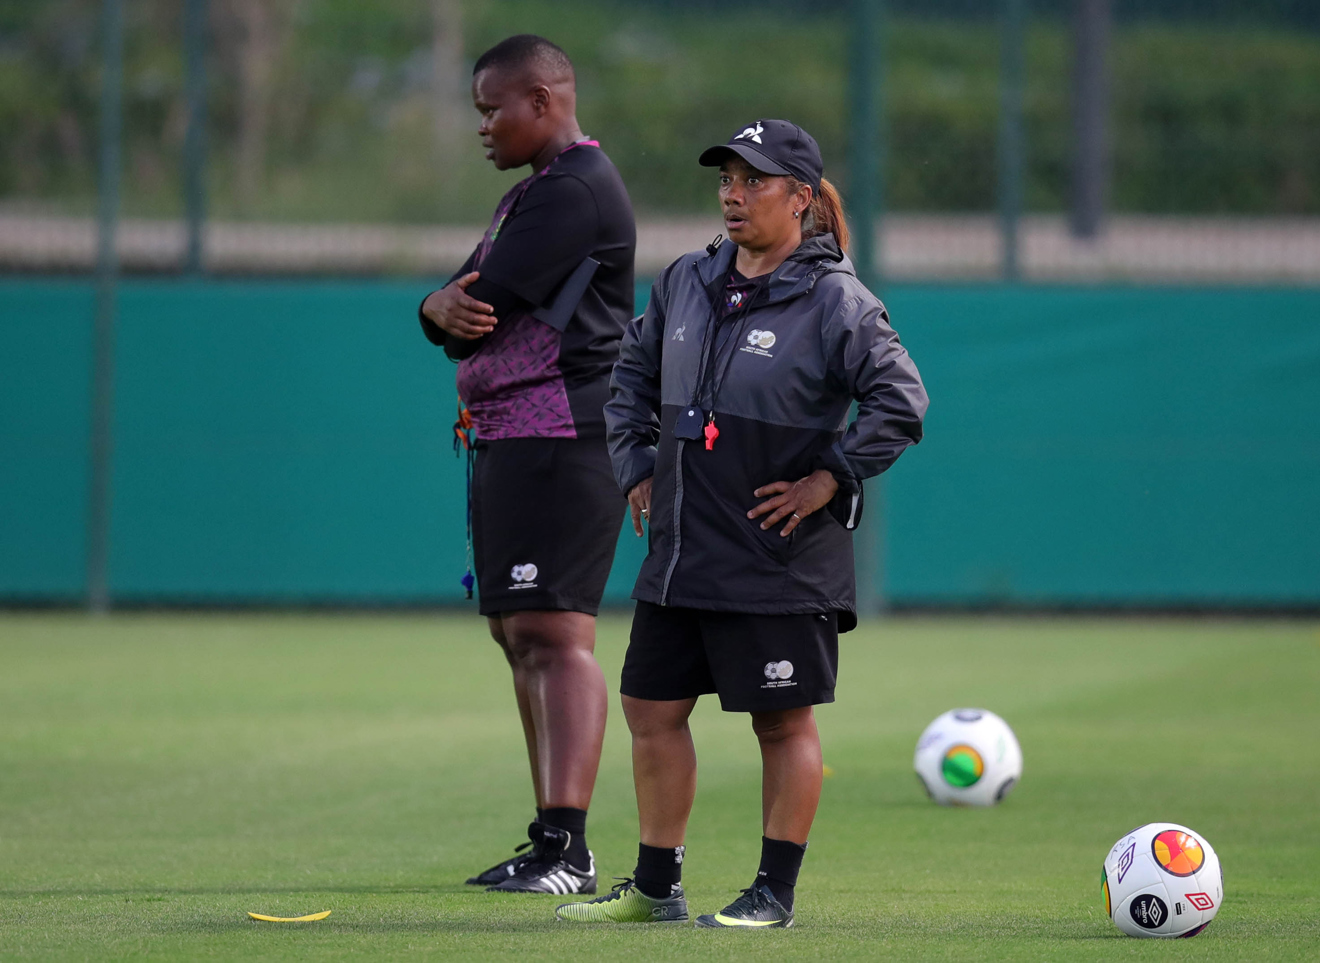 Desiree Ellis, coach of South Africa and Thinasonke Mdluli, assistant coach of South Africa during the 2022 Womens Africa Cup of Nations South Africa training session at Complex Mohamed VI De Football, Rabat on 22 July 2022 ©Samuel Shivambu/BackpagePix